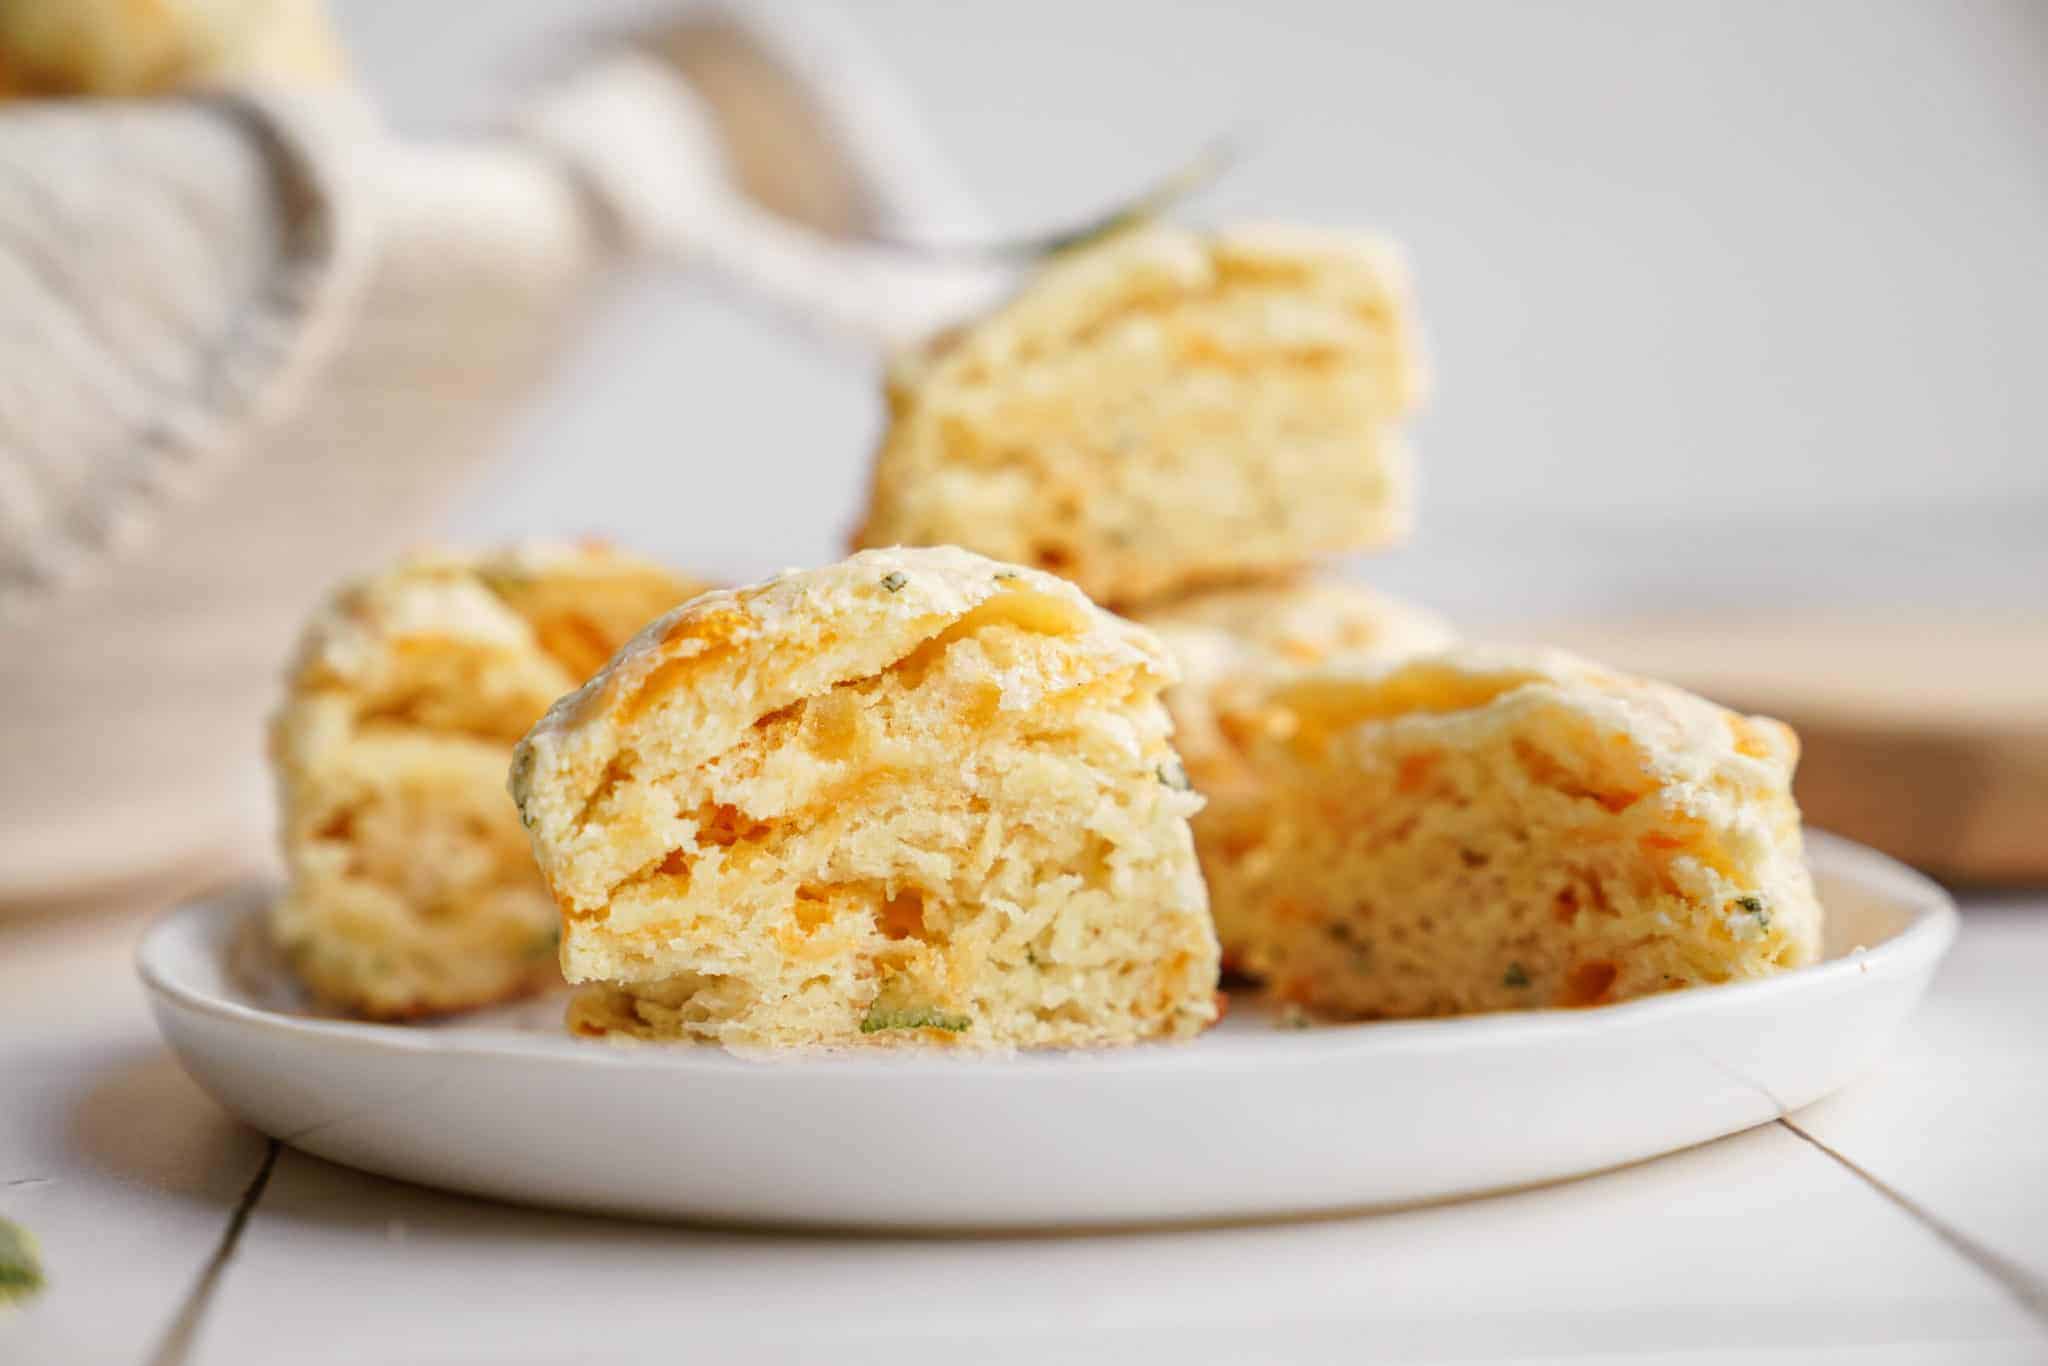 Cheddar biscuits on a white plate